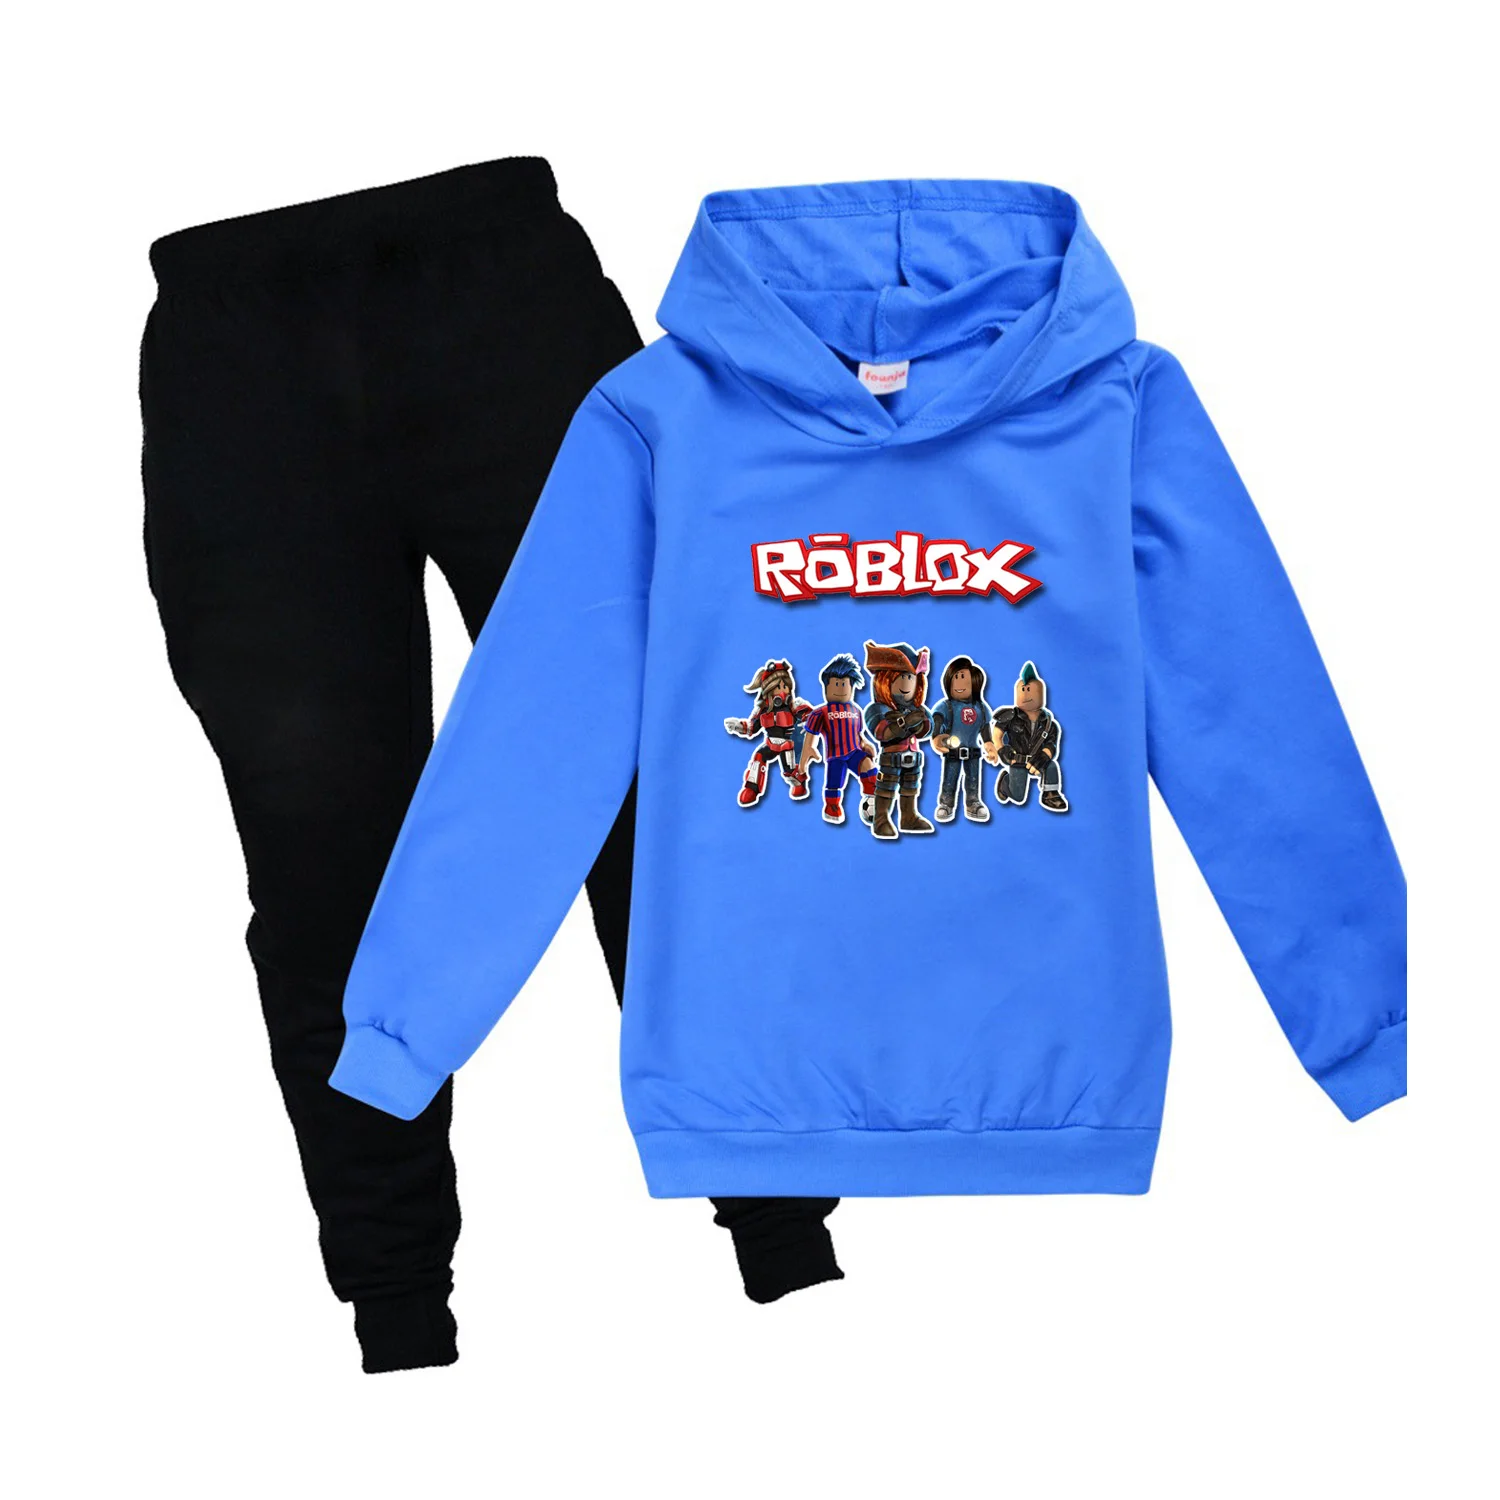 Boys Girls Sport Suit Roblox Pure Cotton Hoodie Pants 2pcs Tracksuit Teen Long Sleeve Sweatshirt Hoodies Pants Hoodies Sweatshirts Aliexpress - blue trench coat roblox